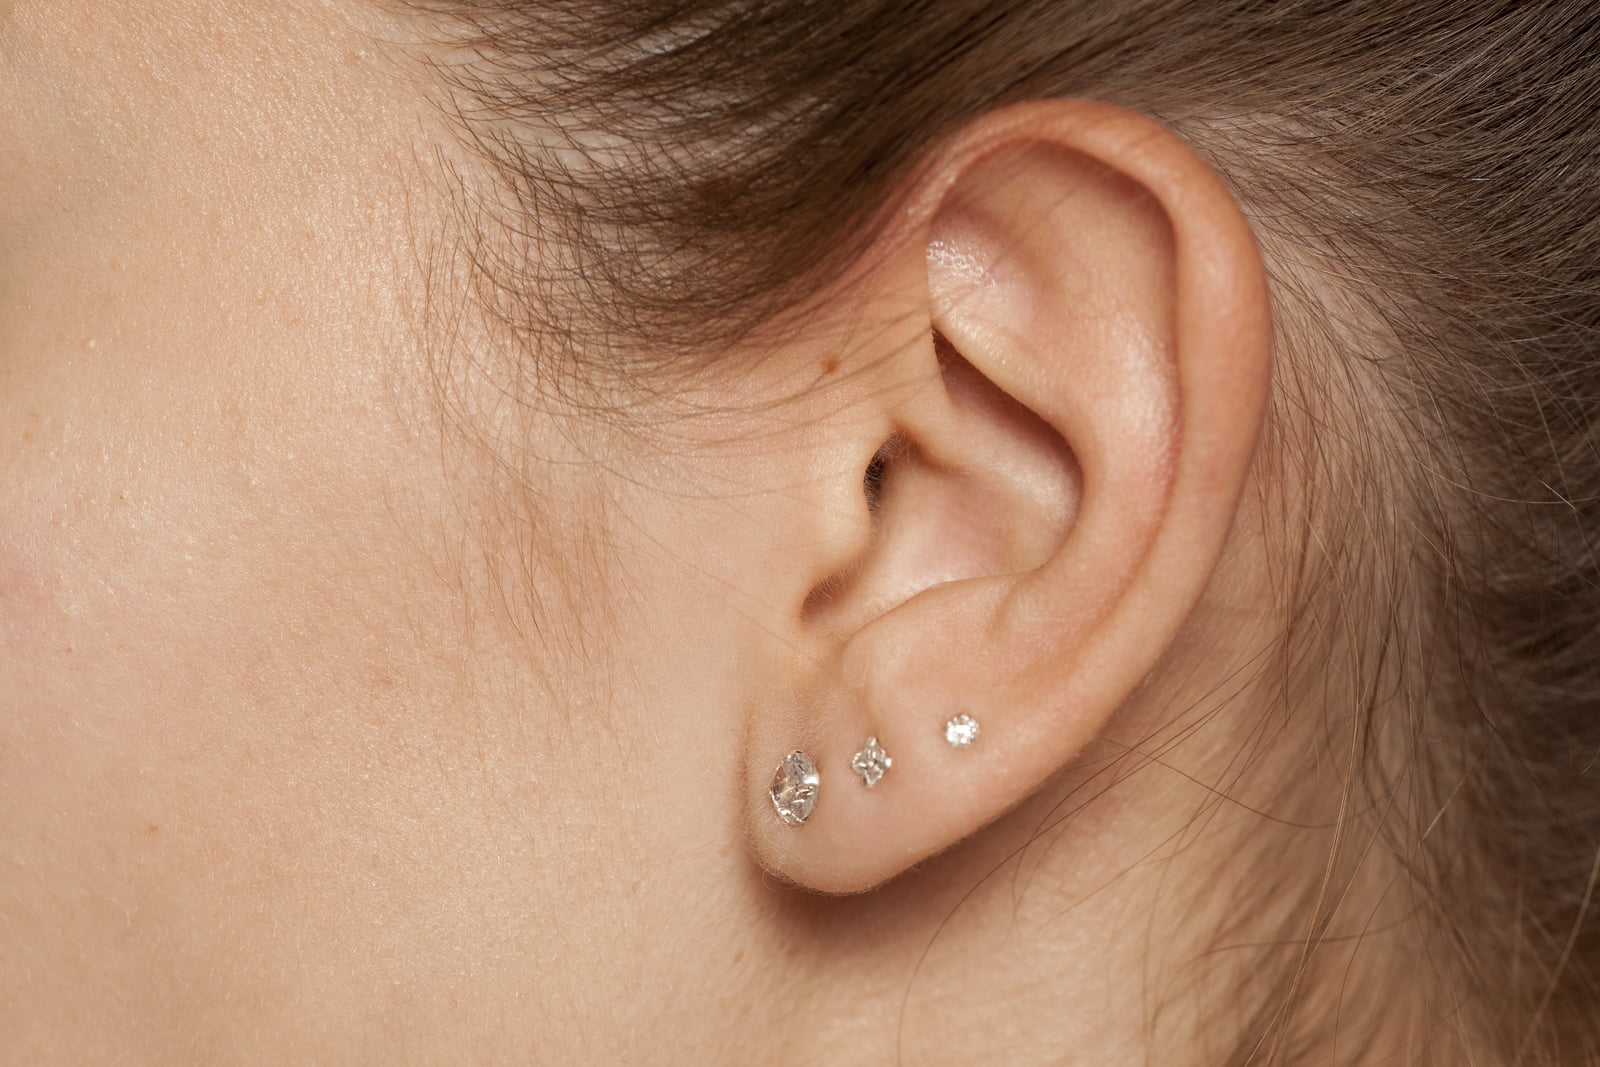 Self Ear Piercing Guide: How to Pierce Your Own Ear At Home 1